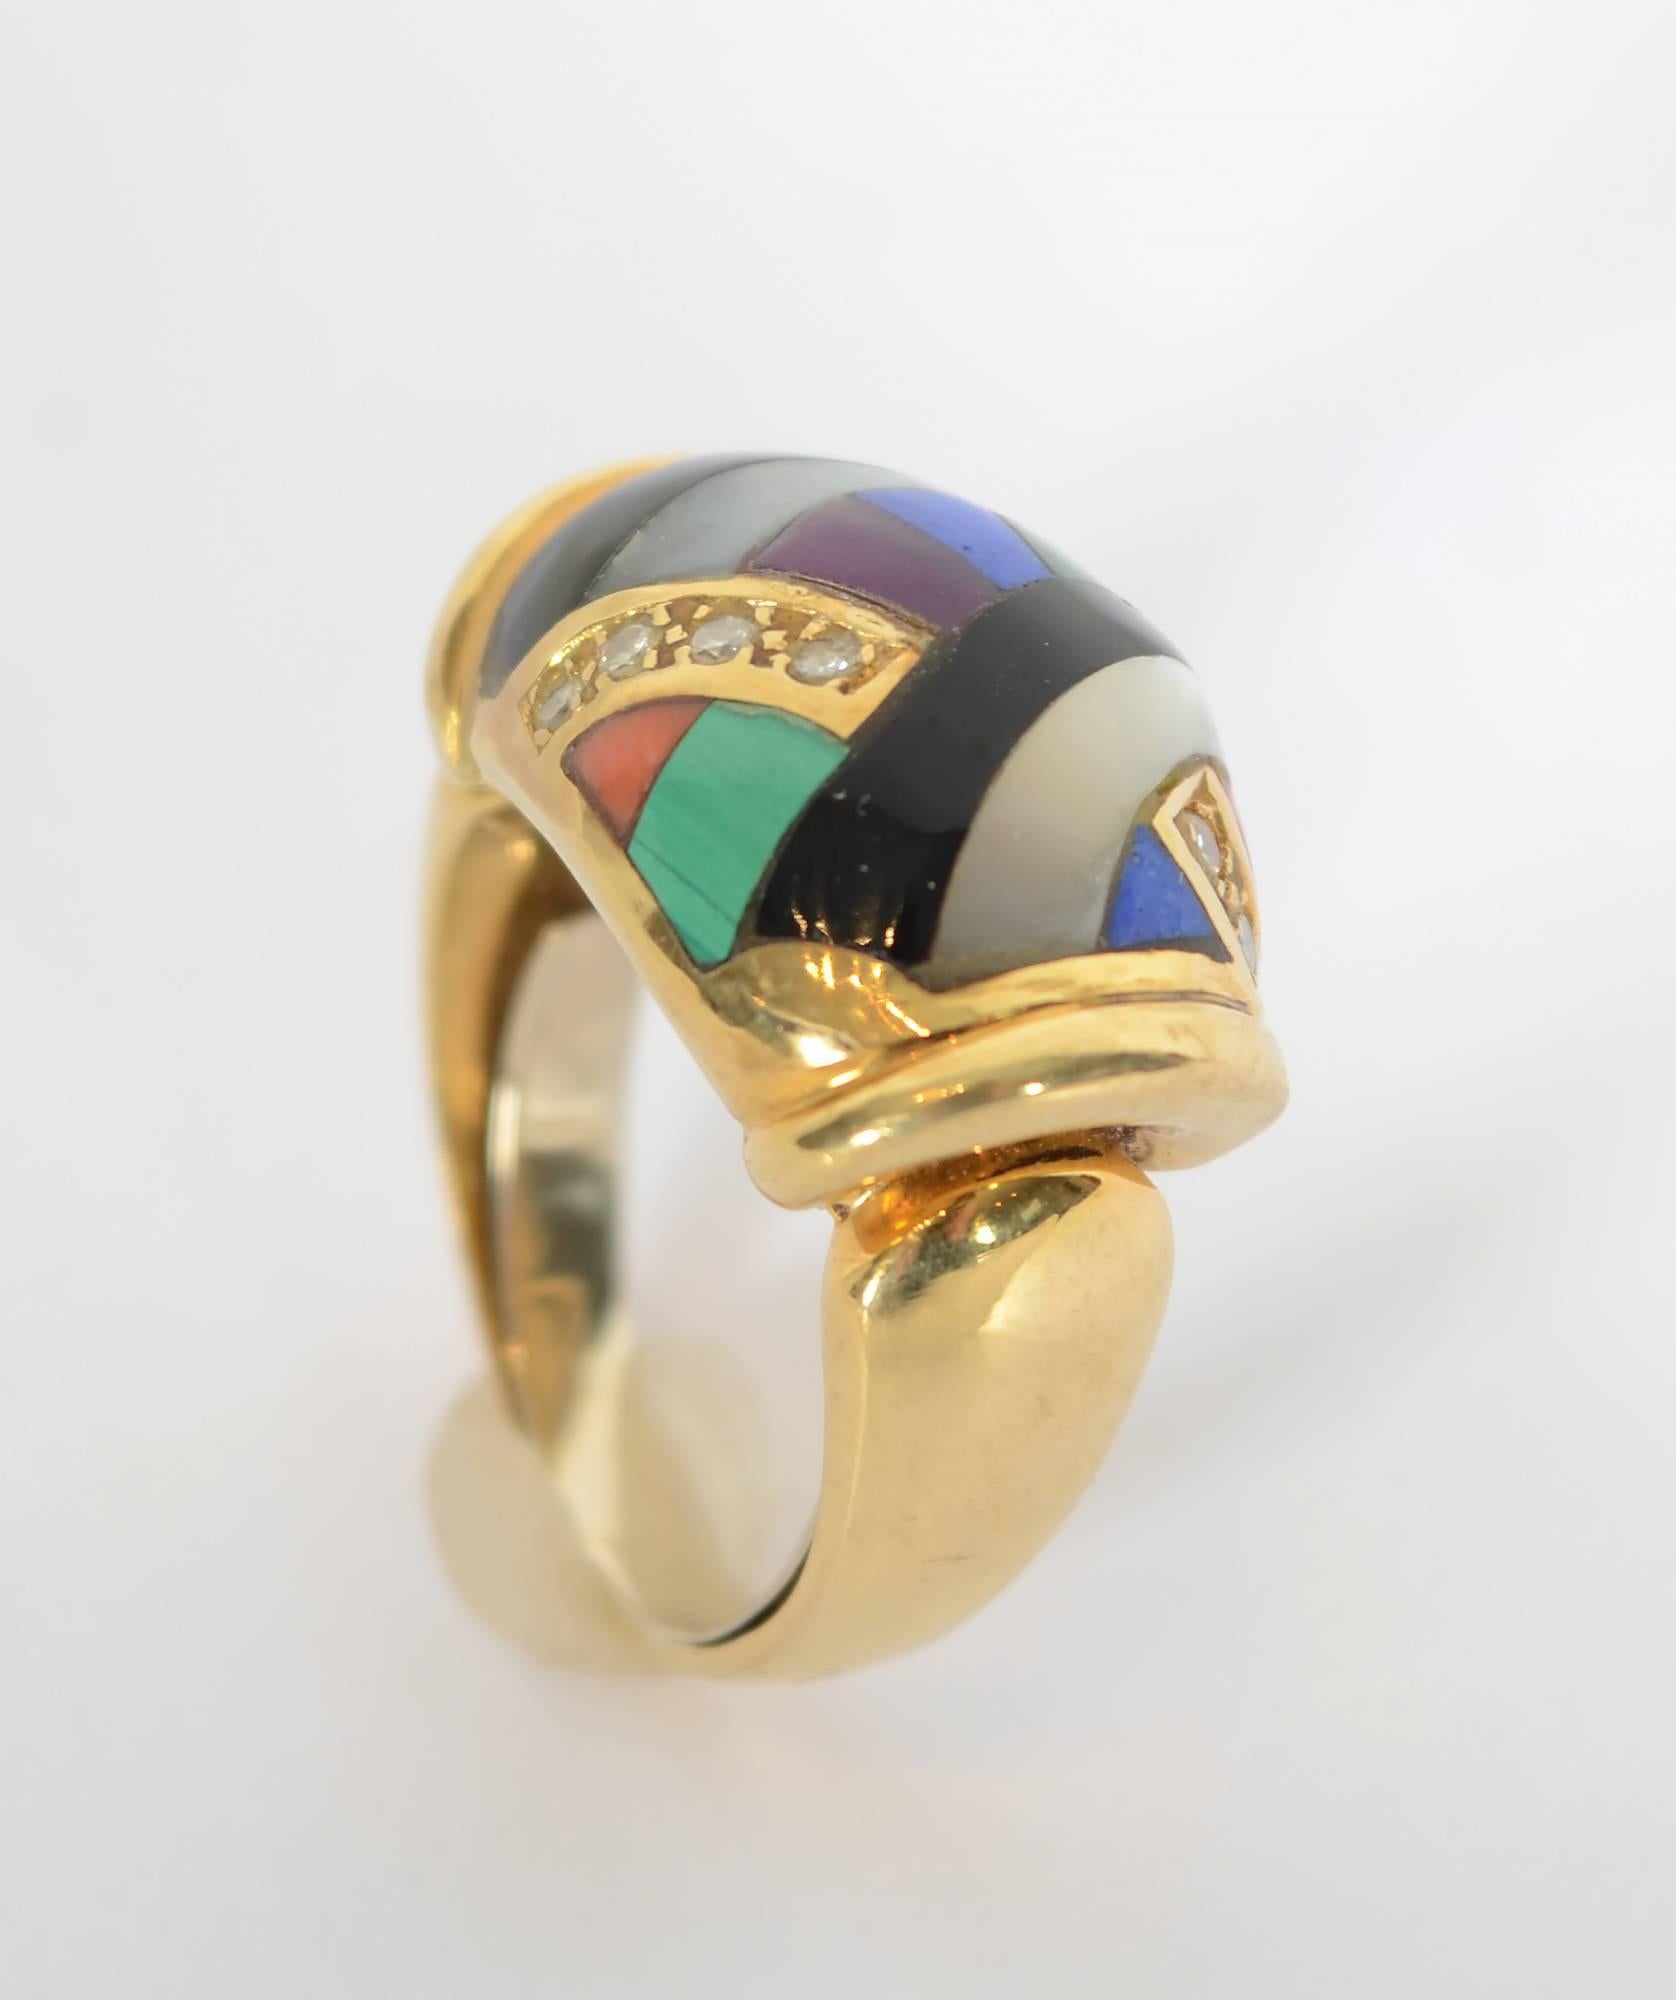 Stylish abstract design ring by Asch Grossbardt with a Deco feel. Inset in the 18 karat gold are: diamonds; lapis lazuli; black onyx; mother of pearl; malachite ; purple sugilite and coral. The dome shaped setting for the stones sits above the band